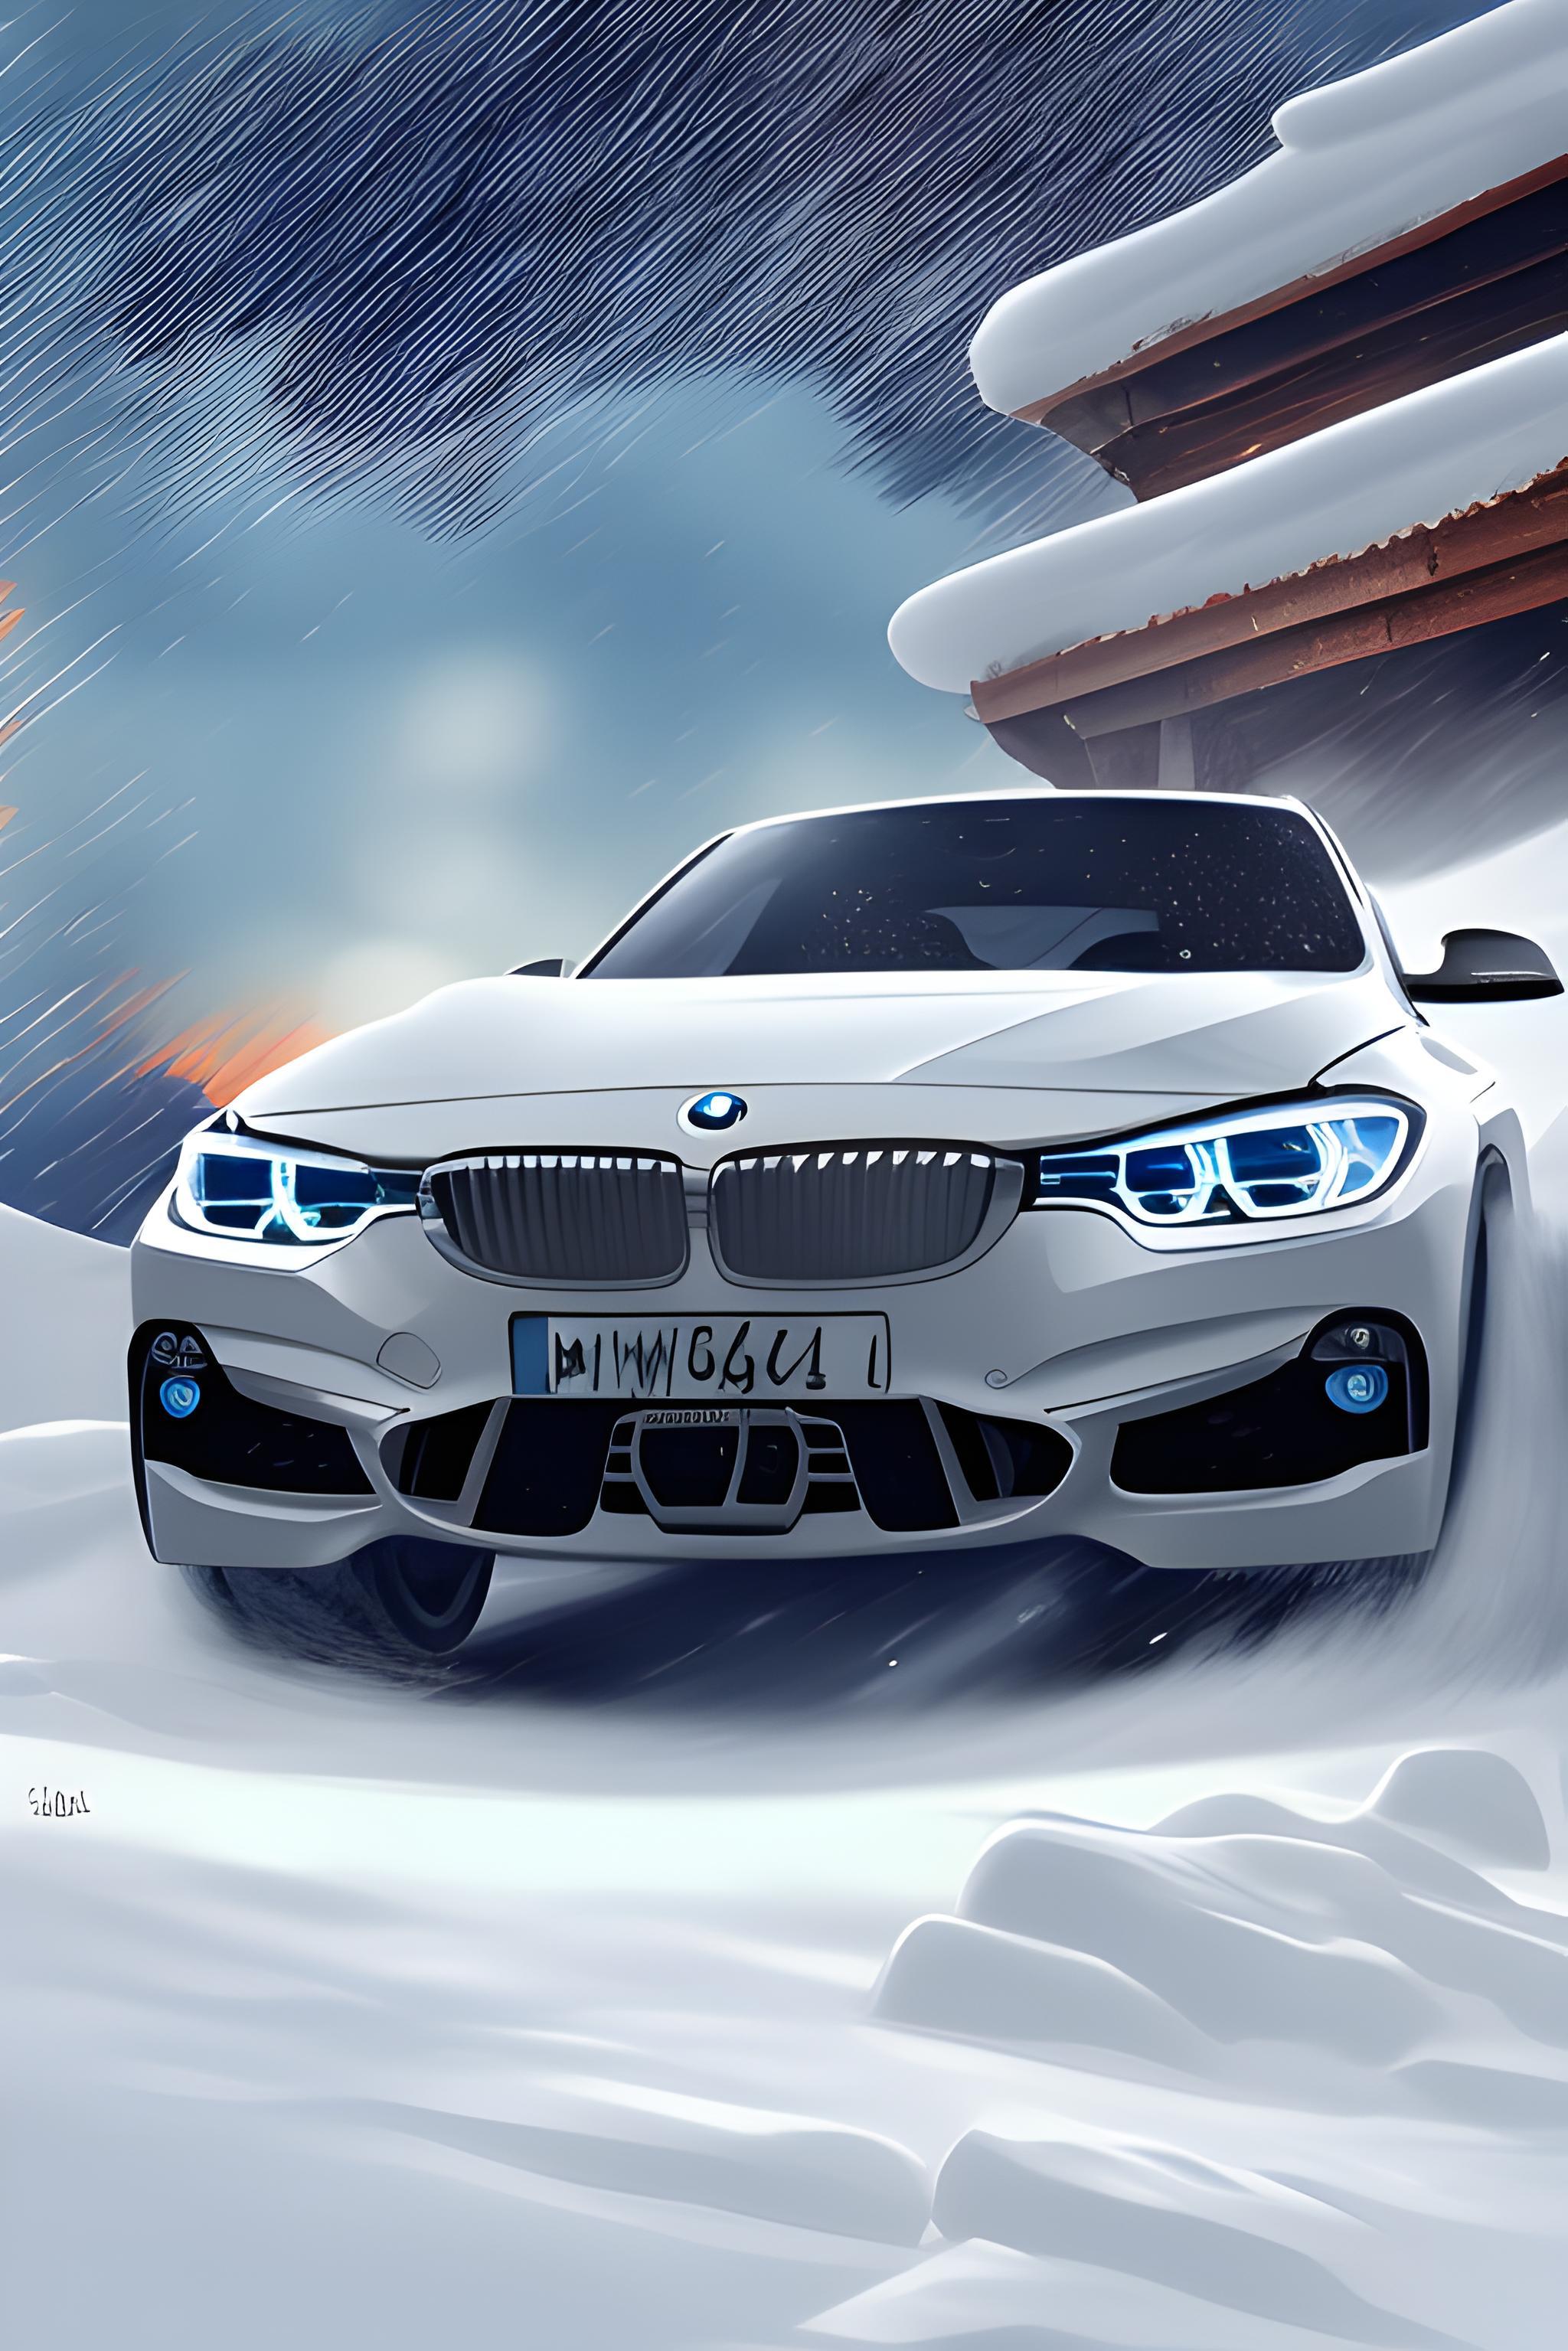 Bmw In Snow With Strong Boy Front Wallpaper Ai